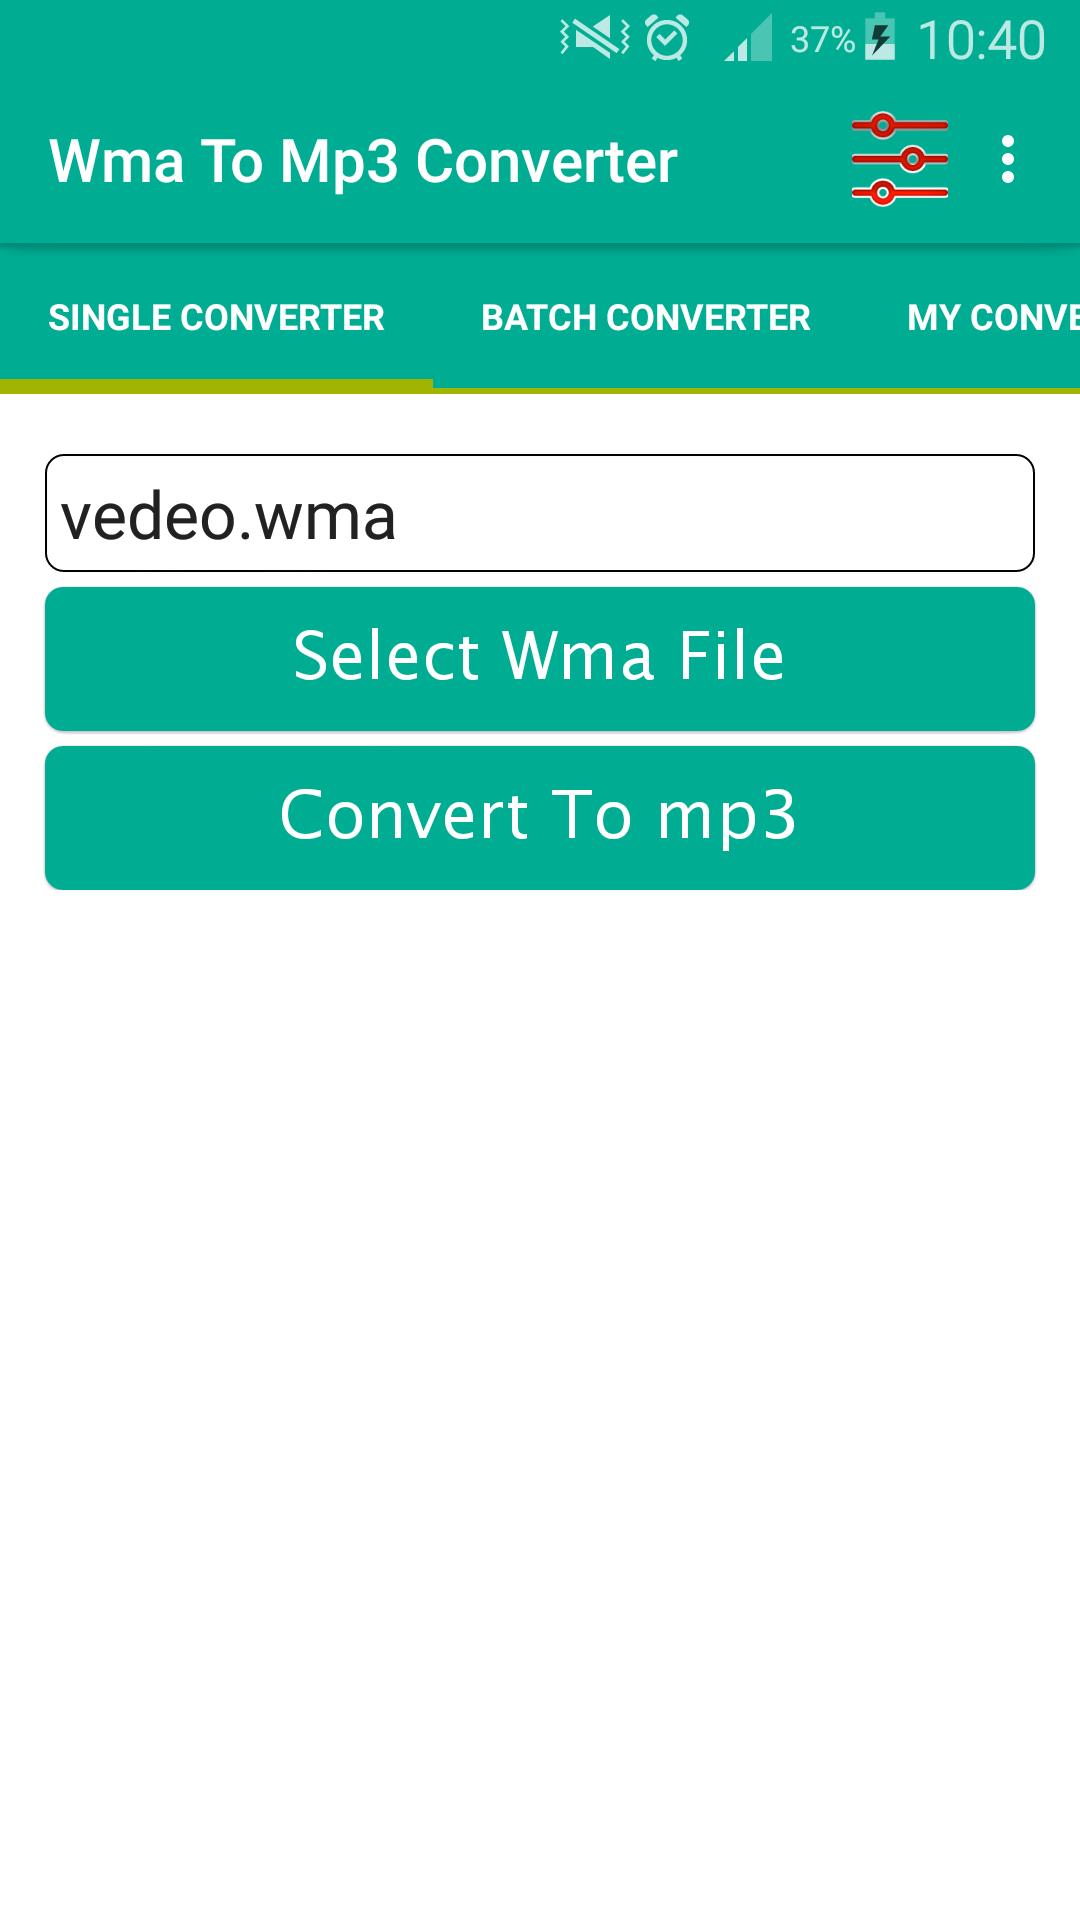 Super Converter : WMA To MP3 for Android - APK Download